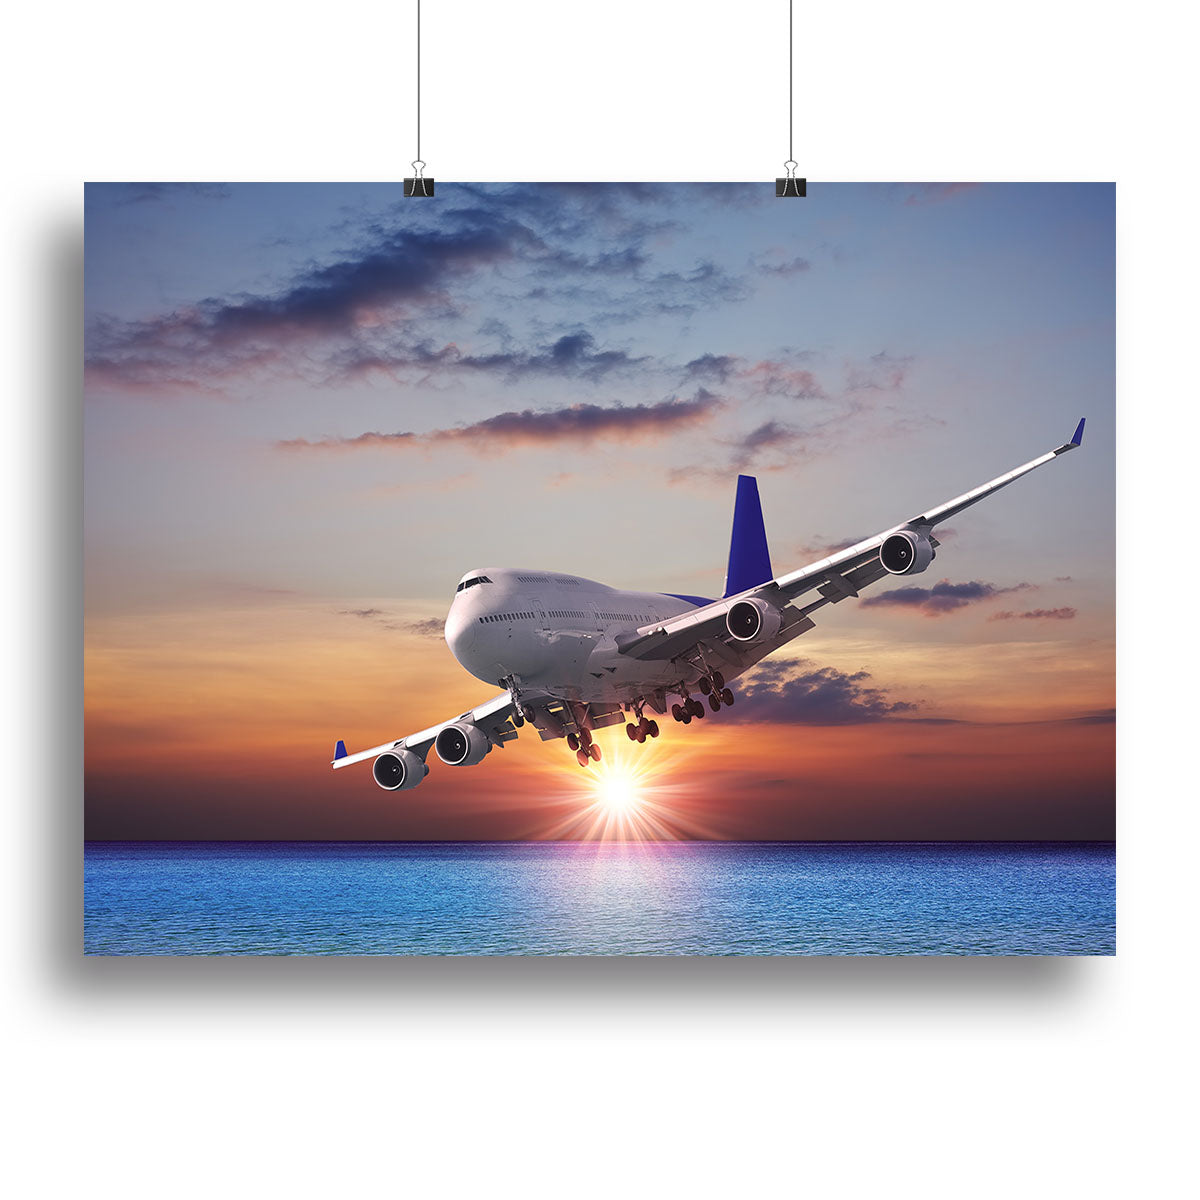 Jet liner over the sea at dusk Canvas Print or Poster - Canvas Art Rocks - 2